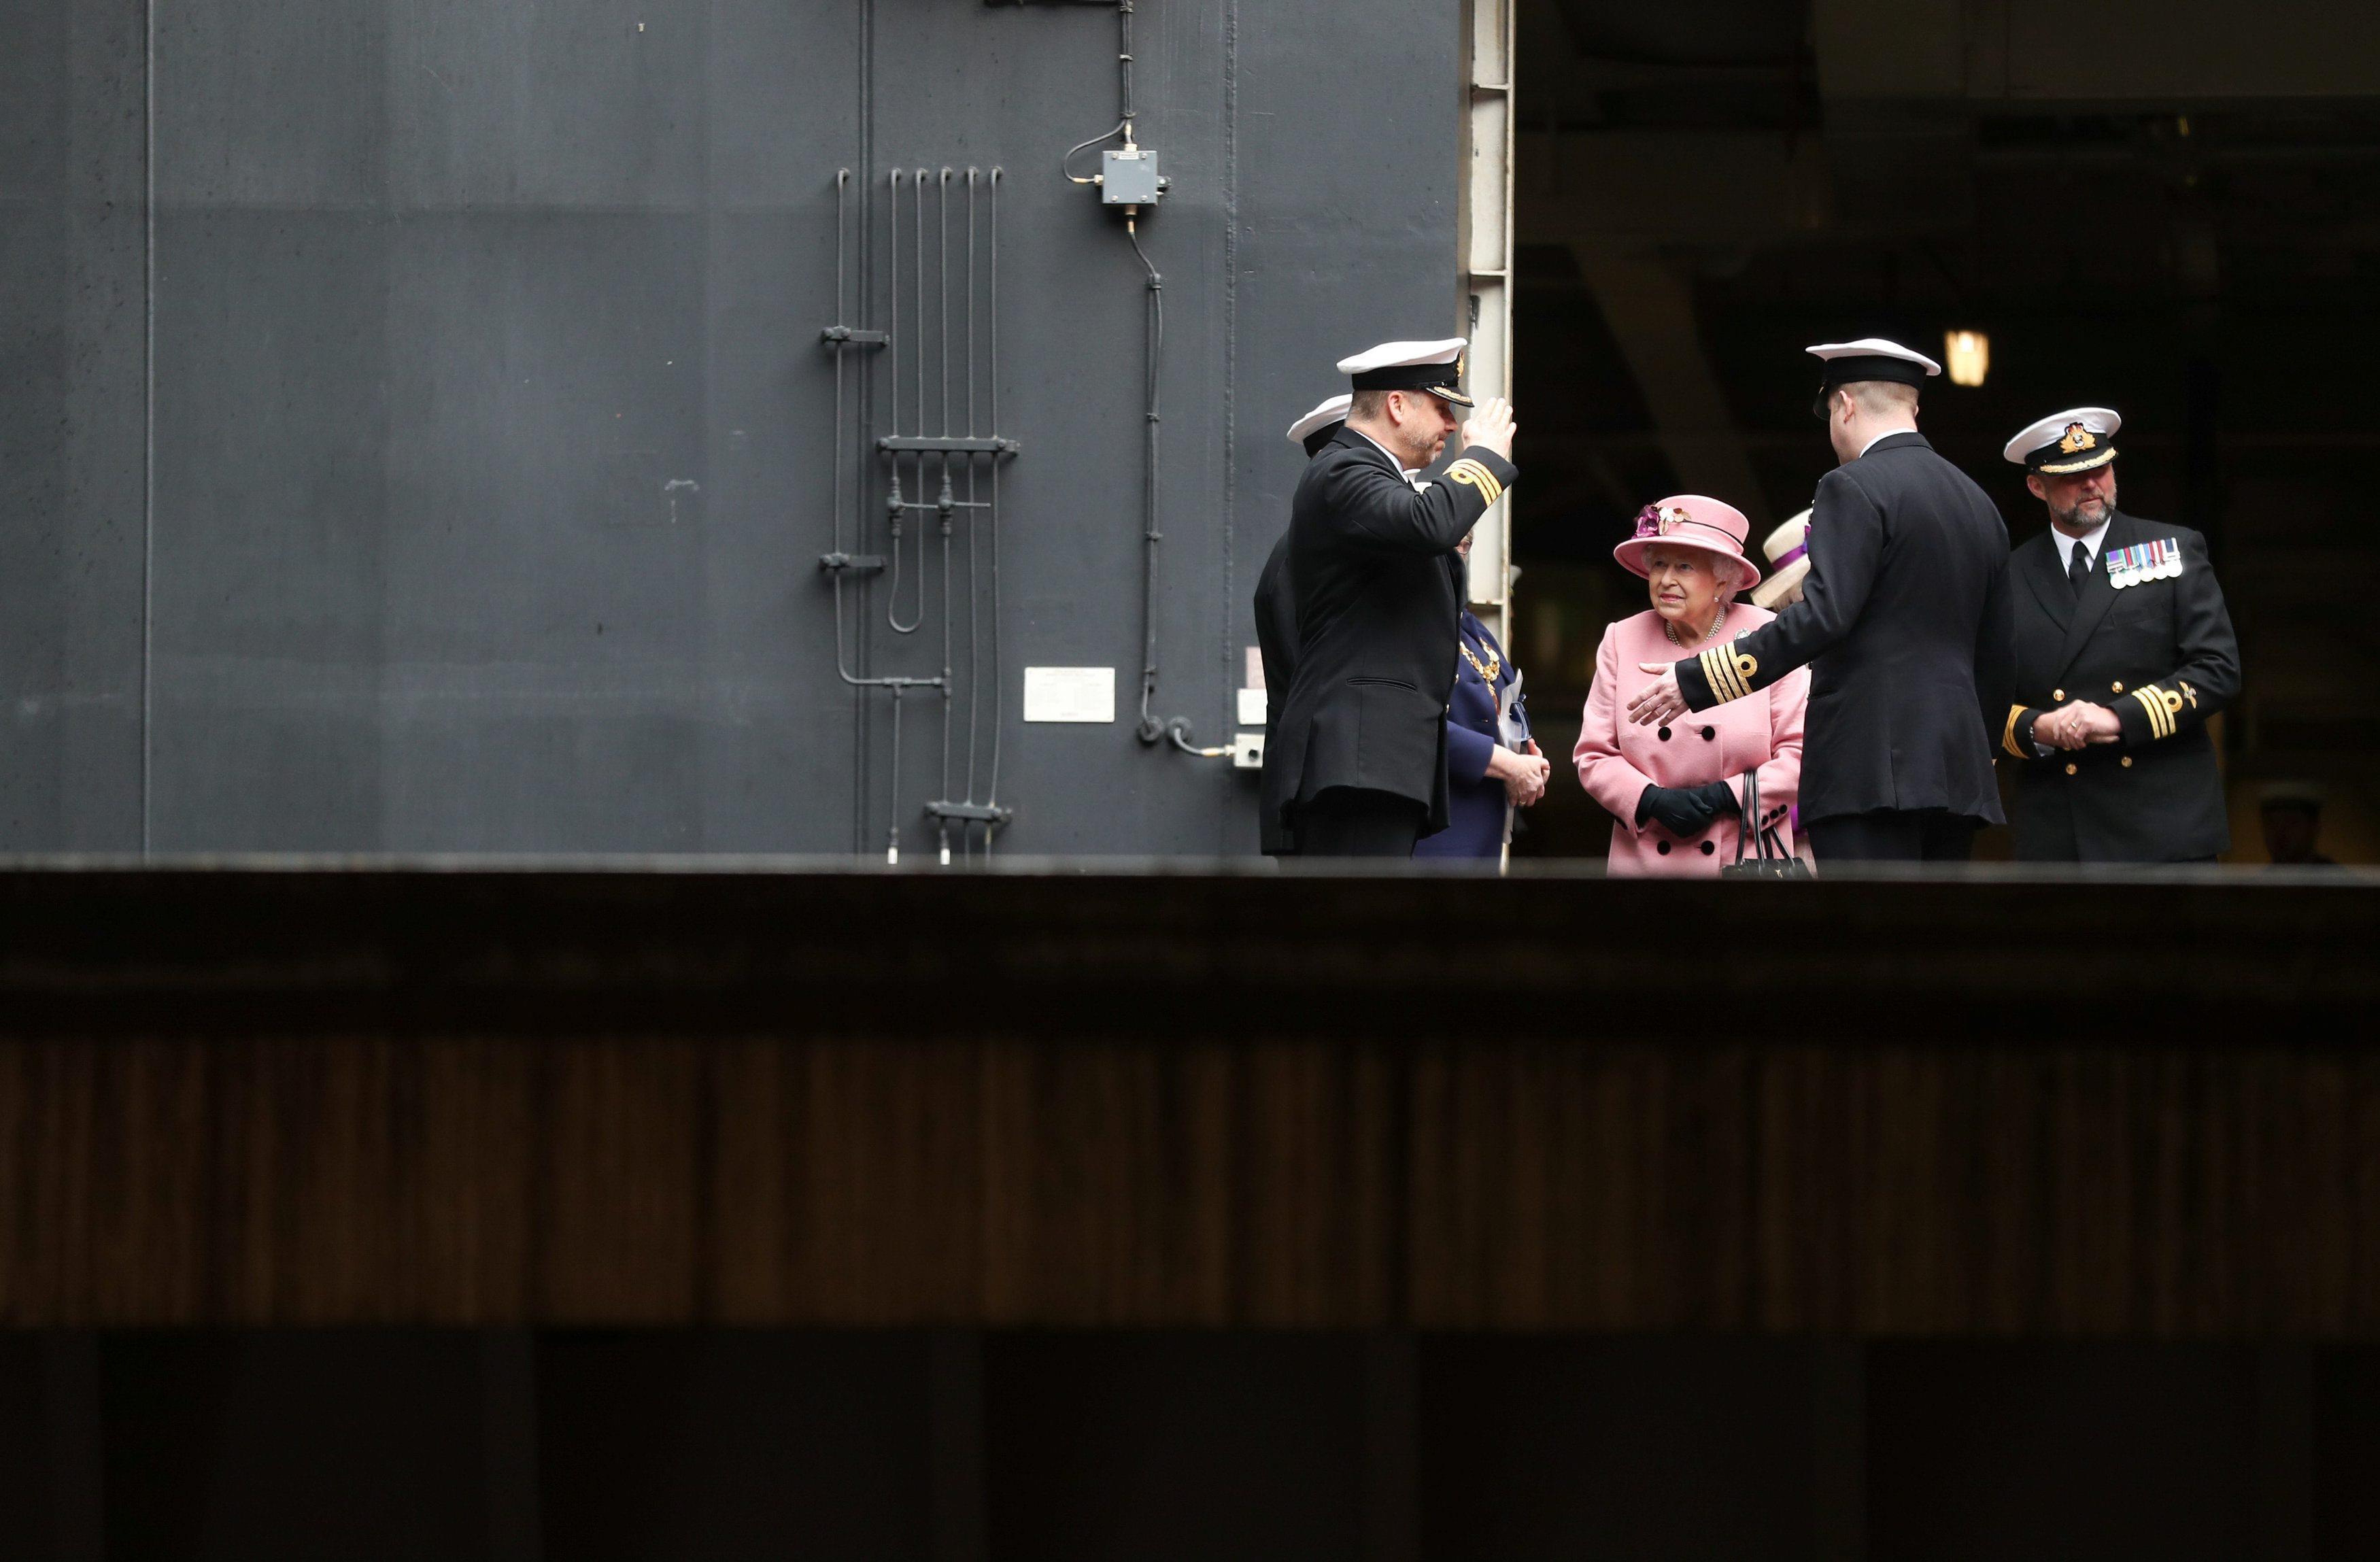 Britain's Queen Elizabeth attends the decommissioning ceremony for HMS Ocean at HMNB Devonport in Pl